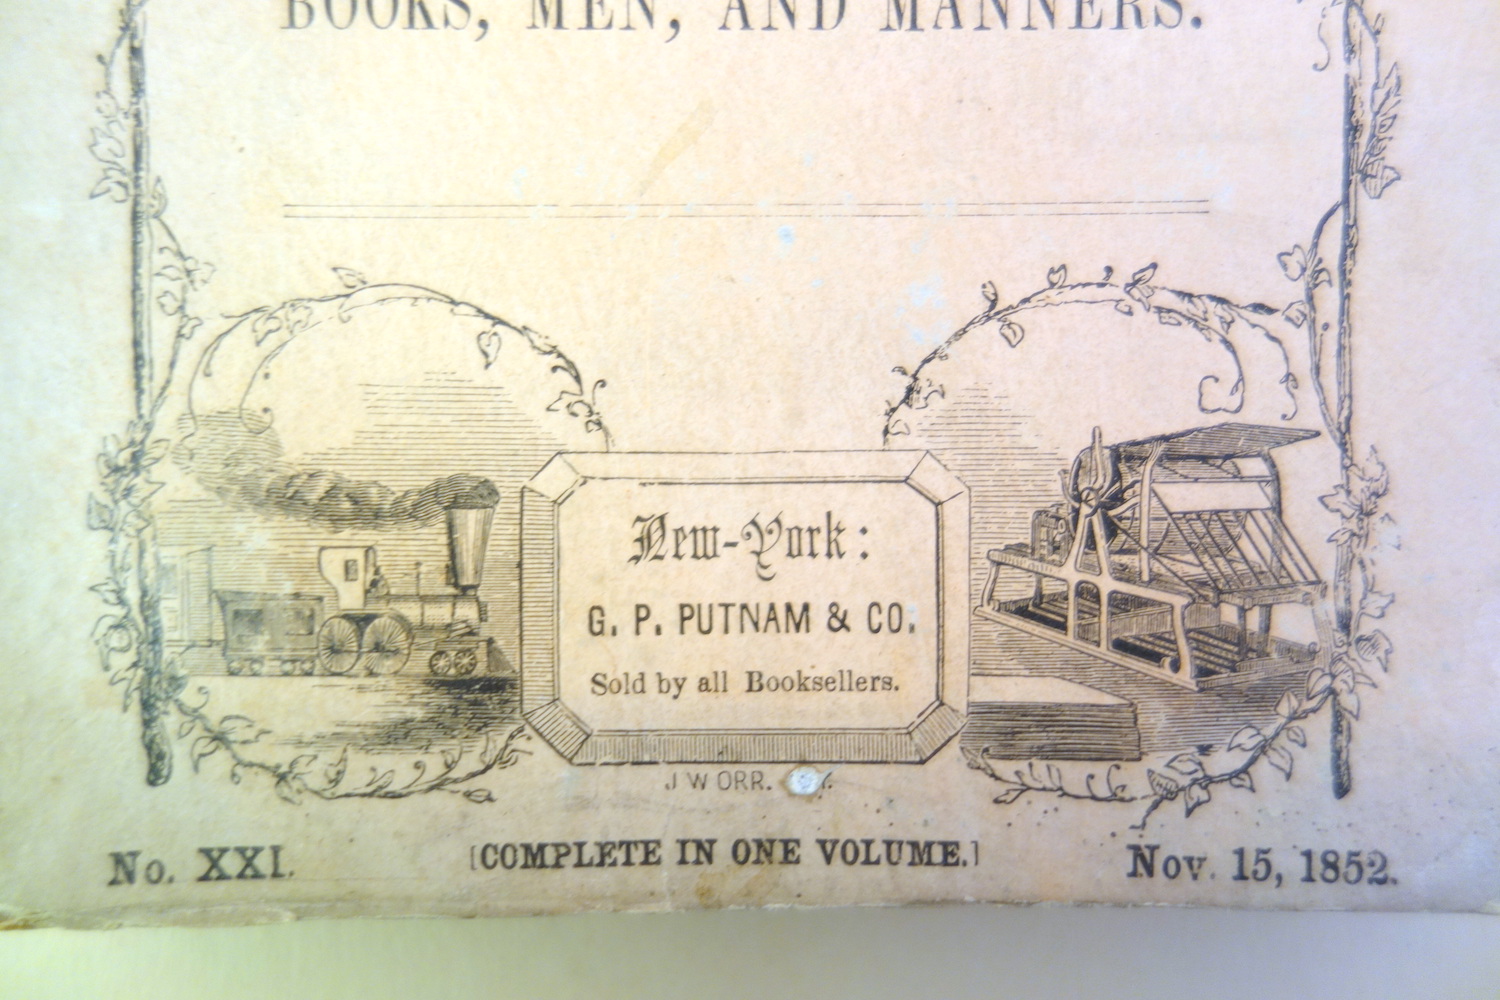 Enlargement of the foot of the Putnam design to show the Hoe cylinder press on the right.